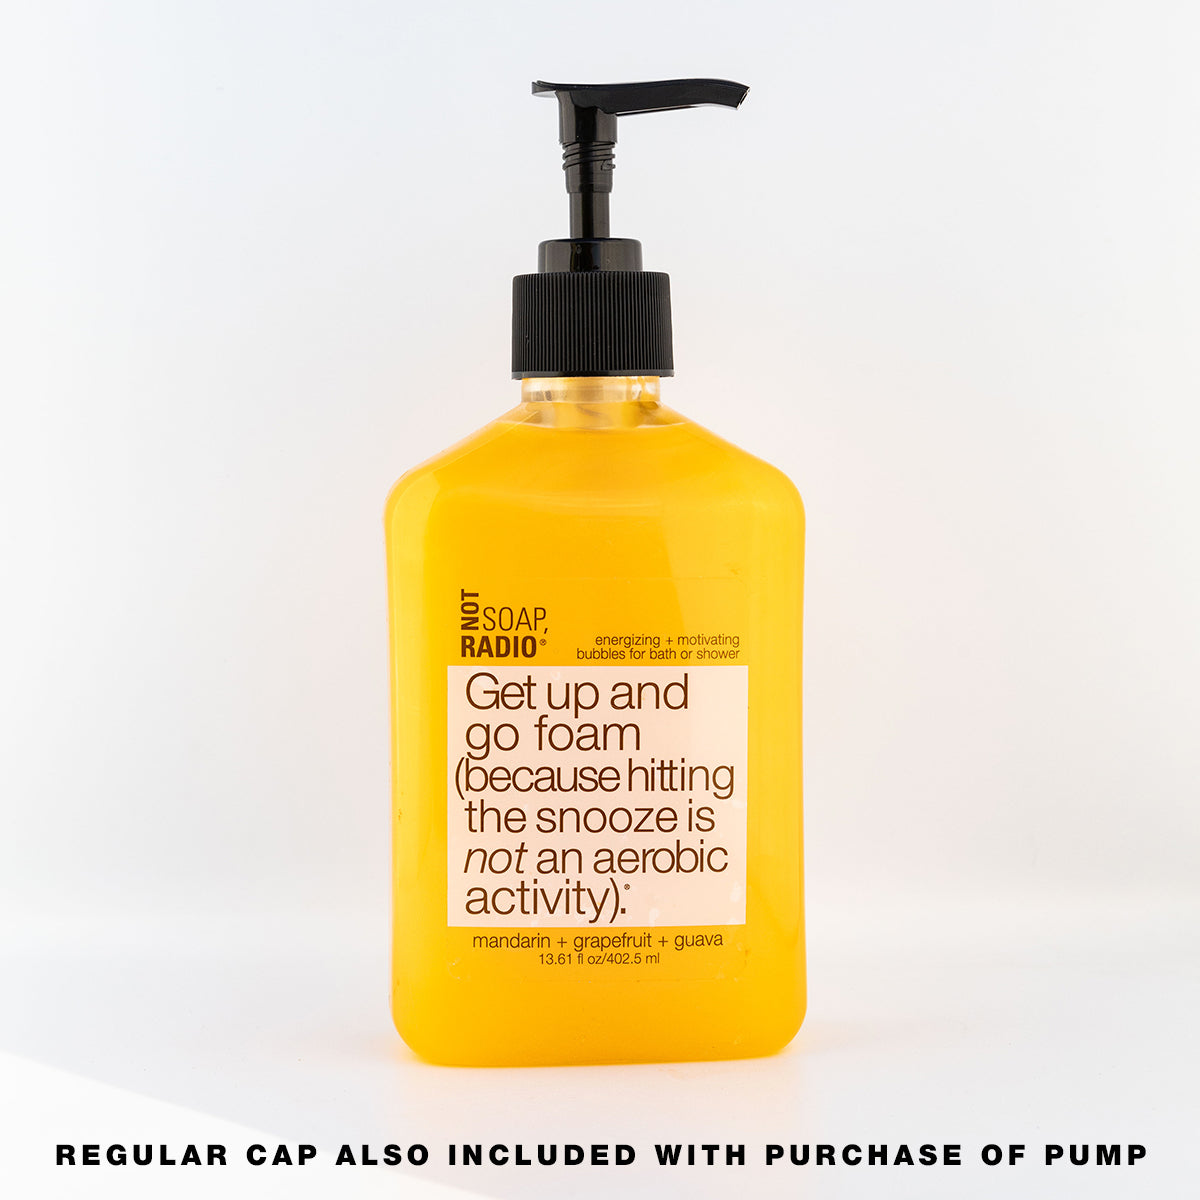 A mandarin, grapefruit, and guava scented bath and shower gel featuring the option to add a pump cap during purchase.